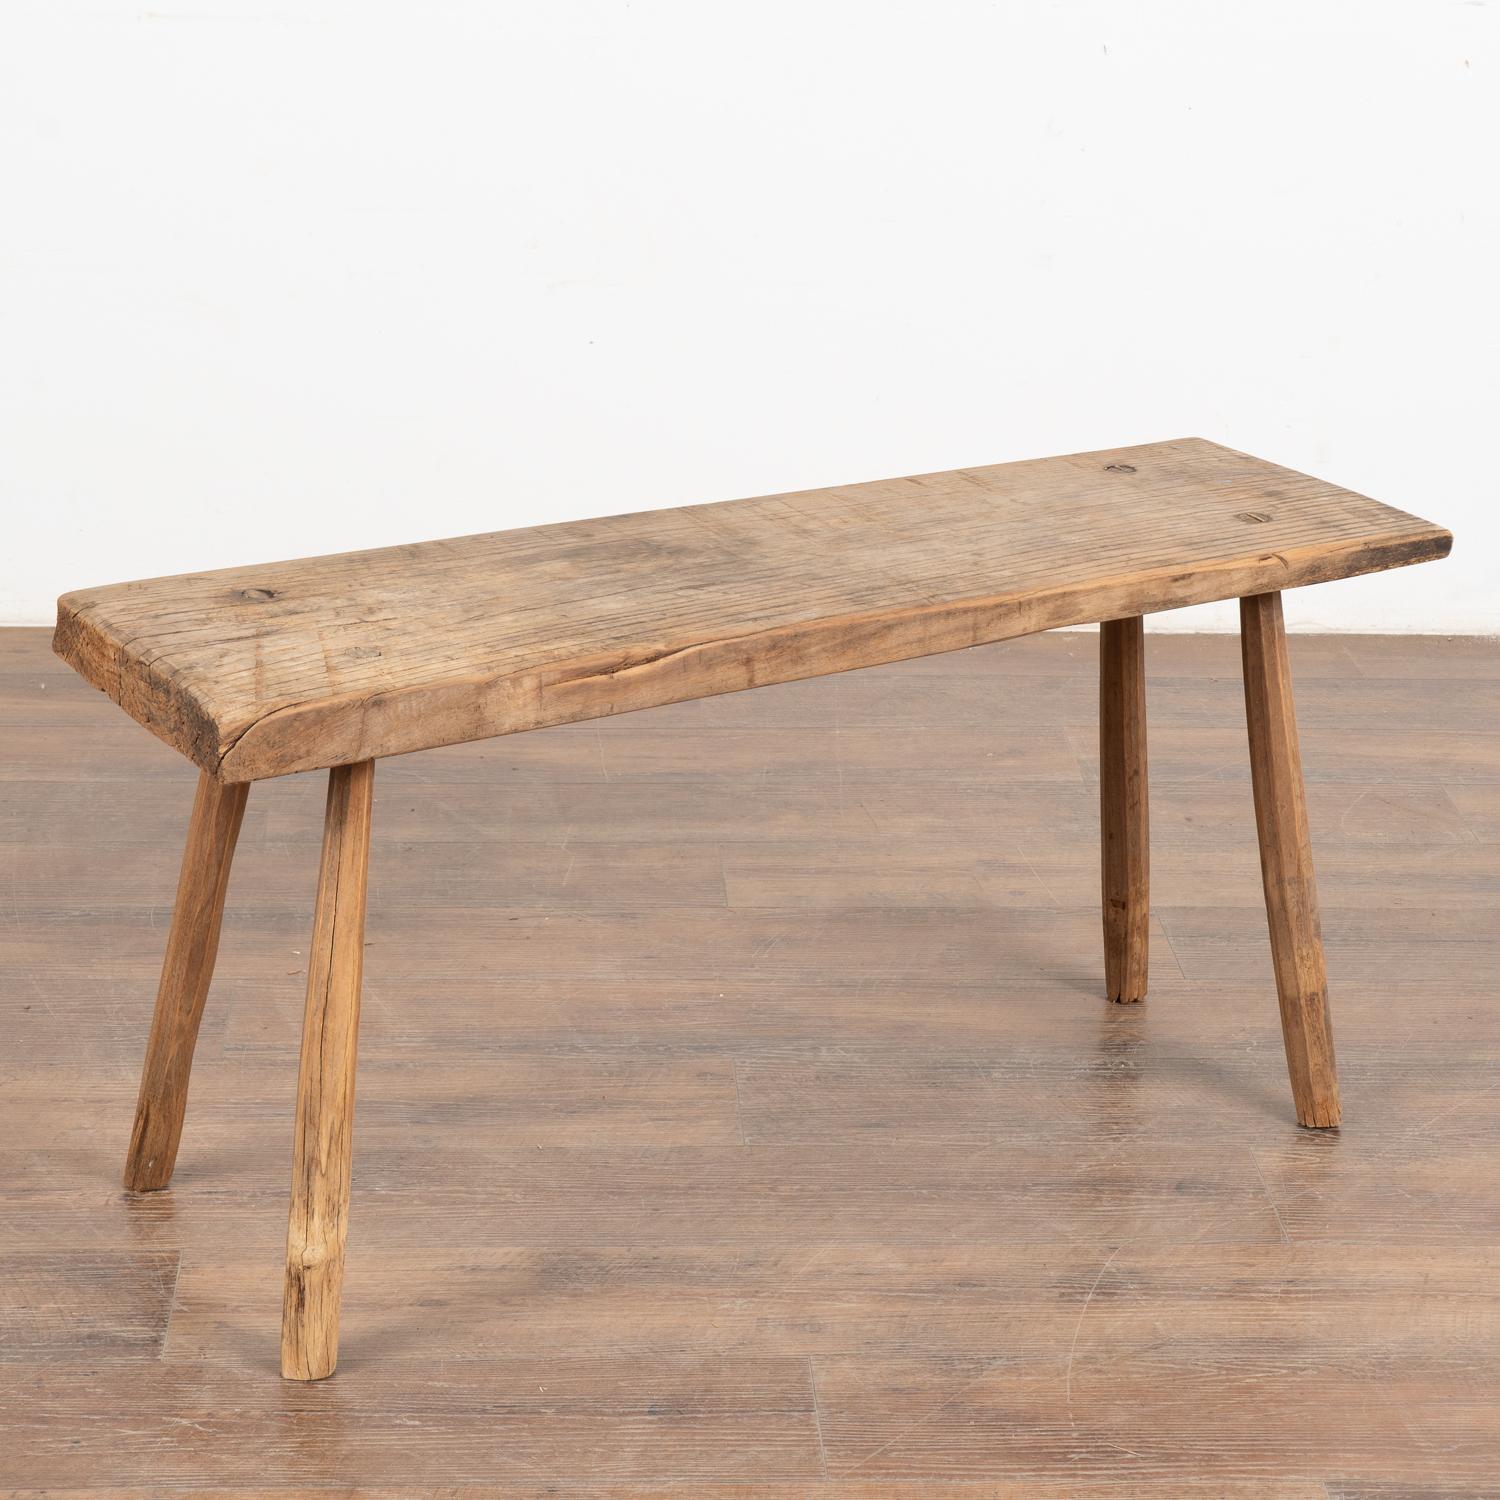 The thick top of this rustic bench is covered in scrapes, gouges, nicks, stains, and old cracks acquired with over 100 years of use. May also serve as a small coffee table.
The top is a single slab of wood with traditional splay peg legs creating